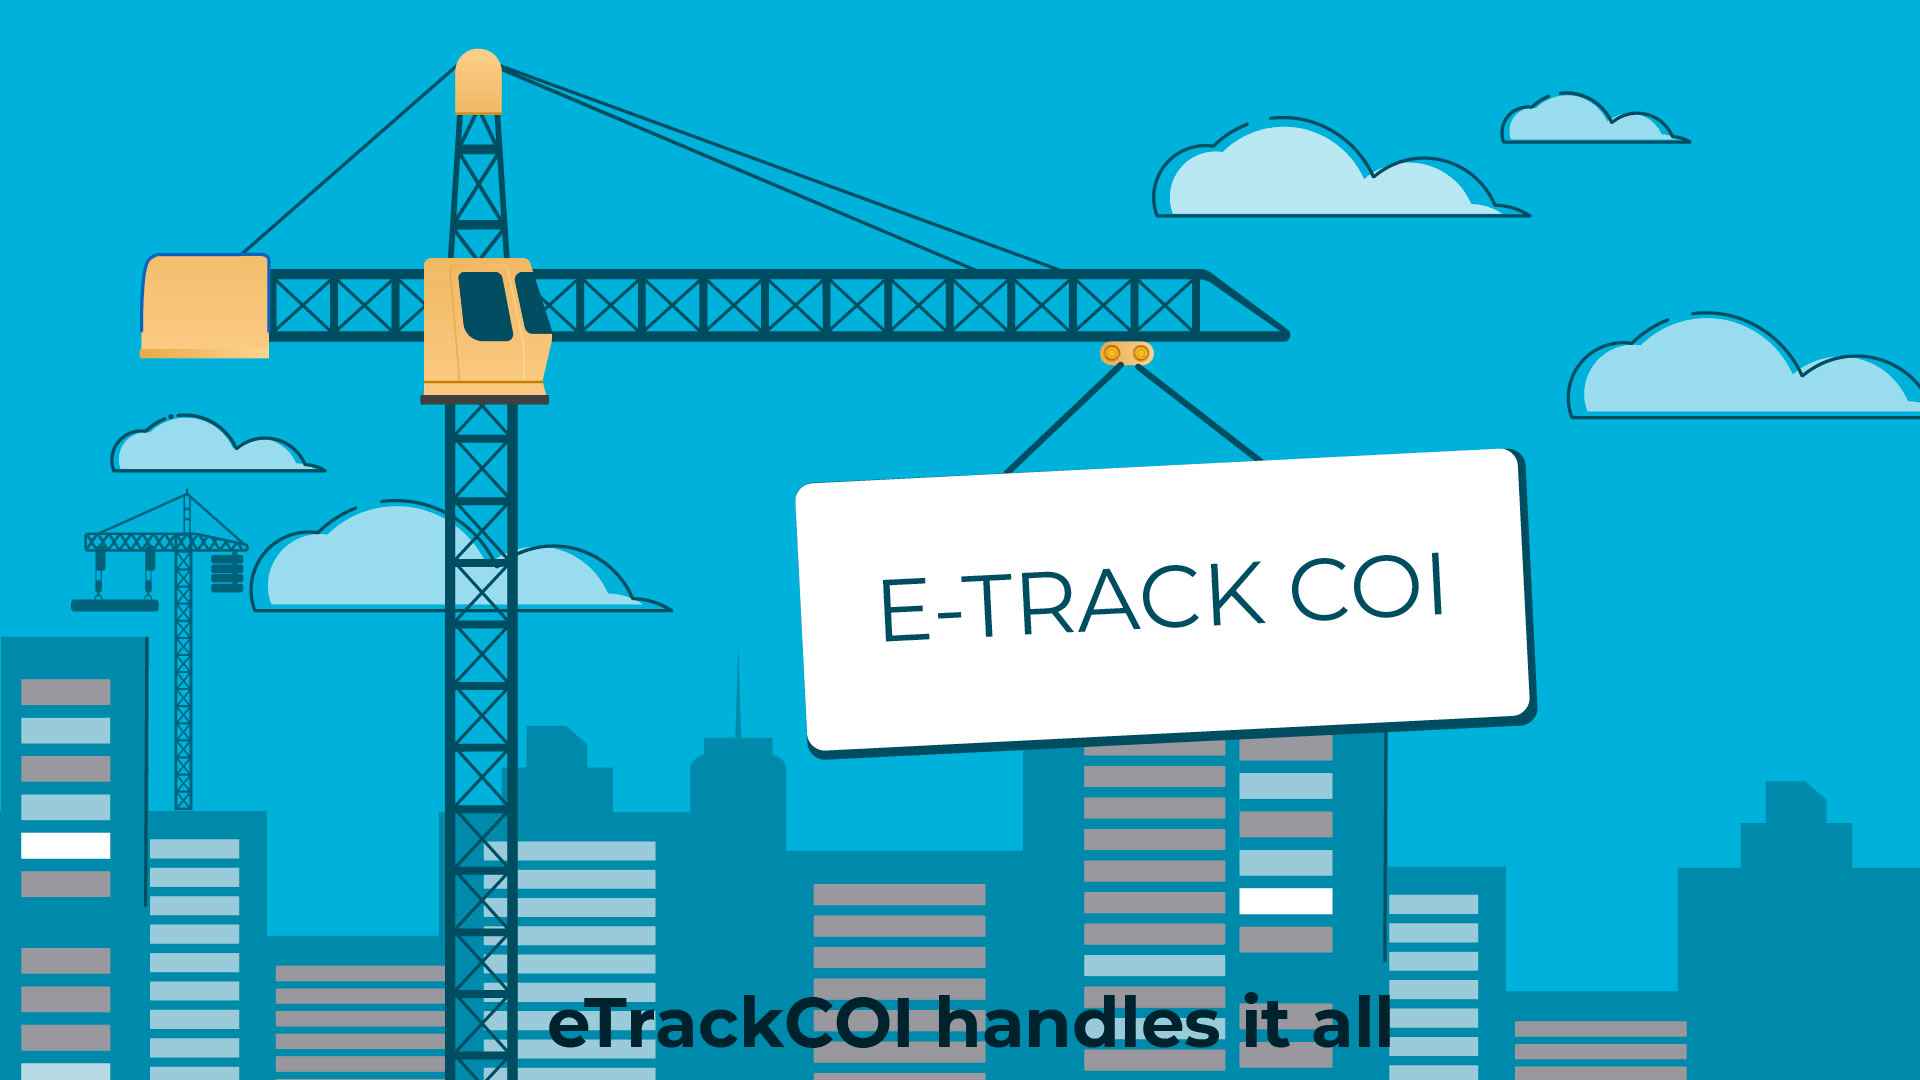 ETrack COI in the video "Employees insurance solution"